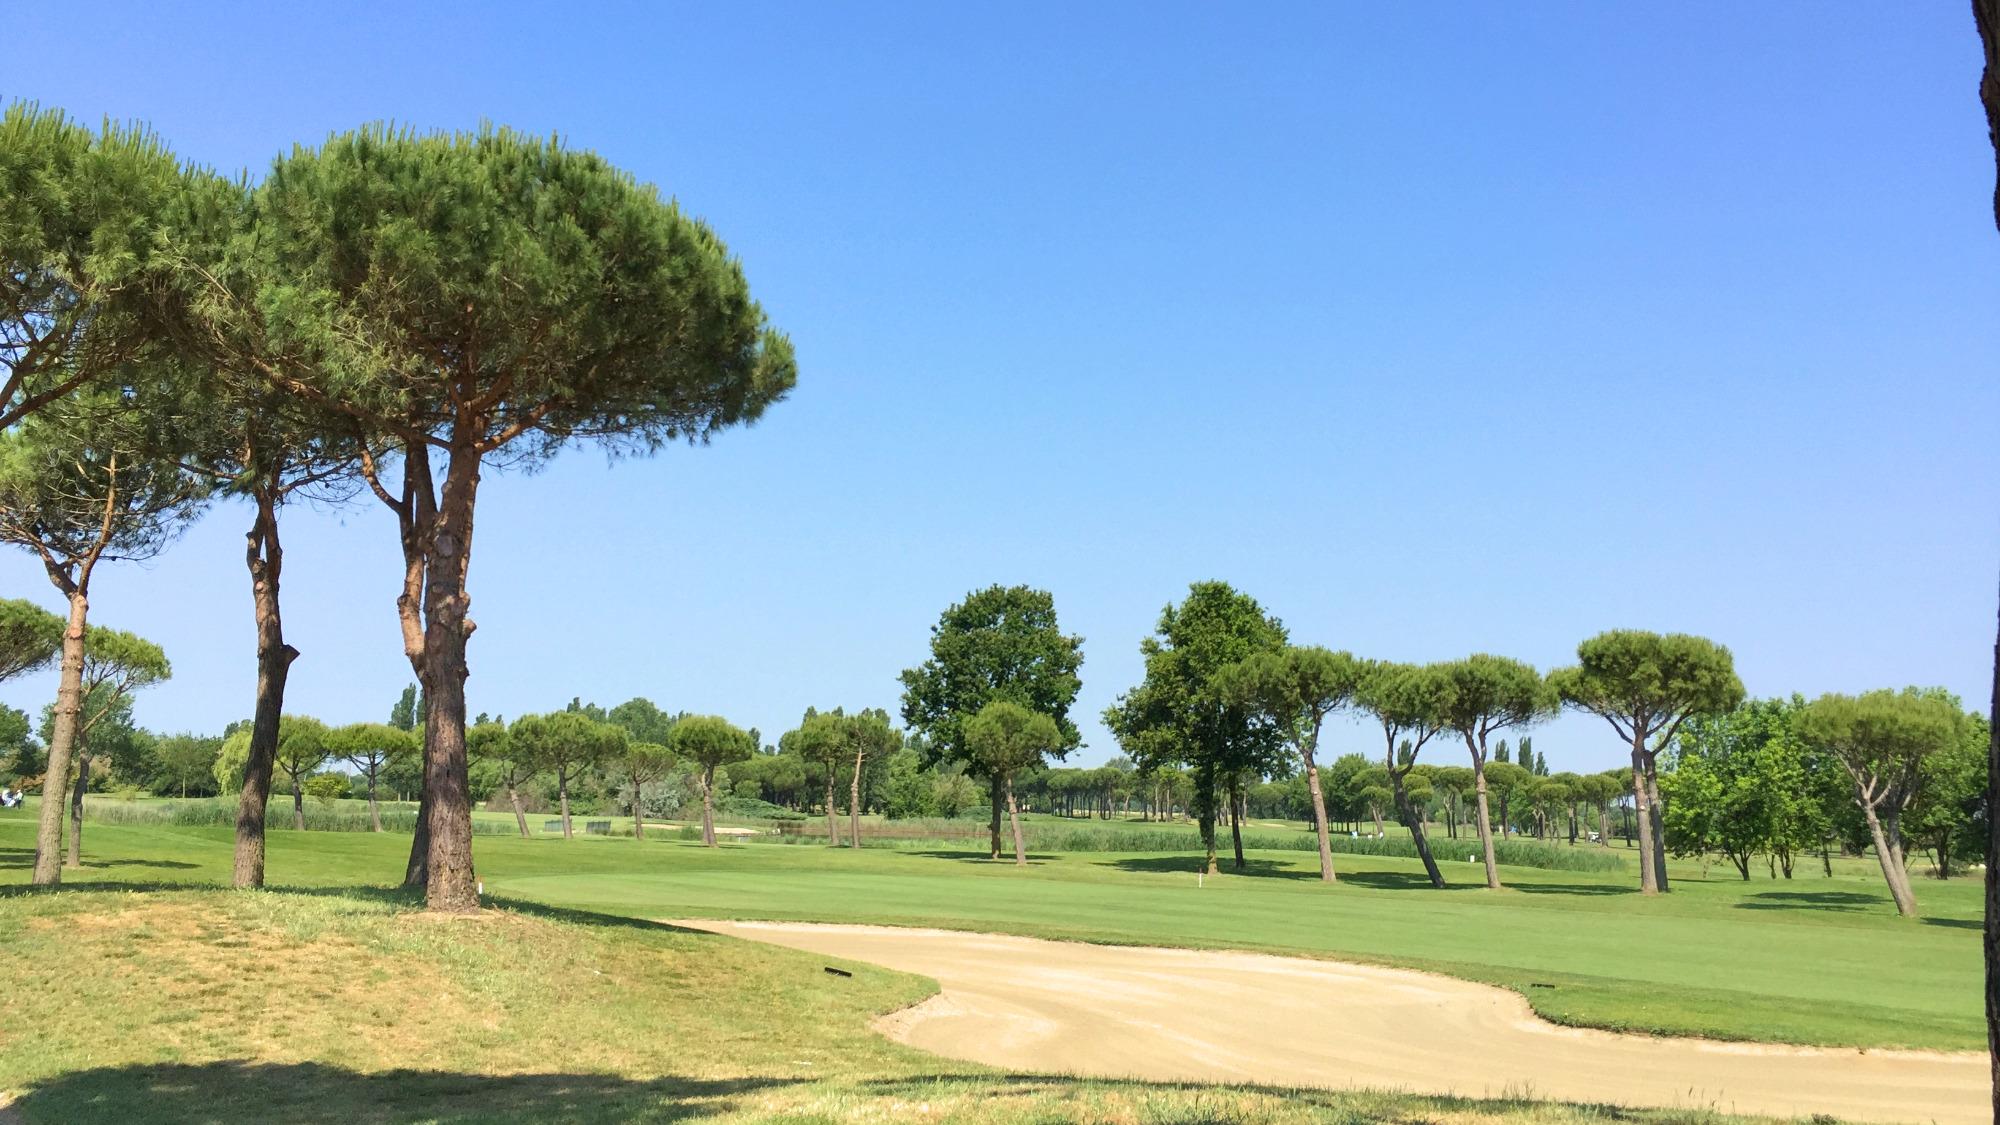 The Adriatic Golf Club Cervia's picturesque golf course situated in impressive Northern Italy.